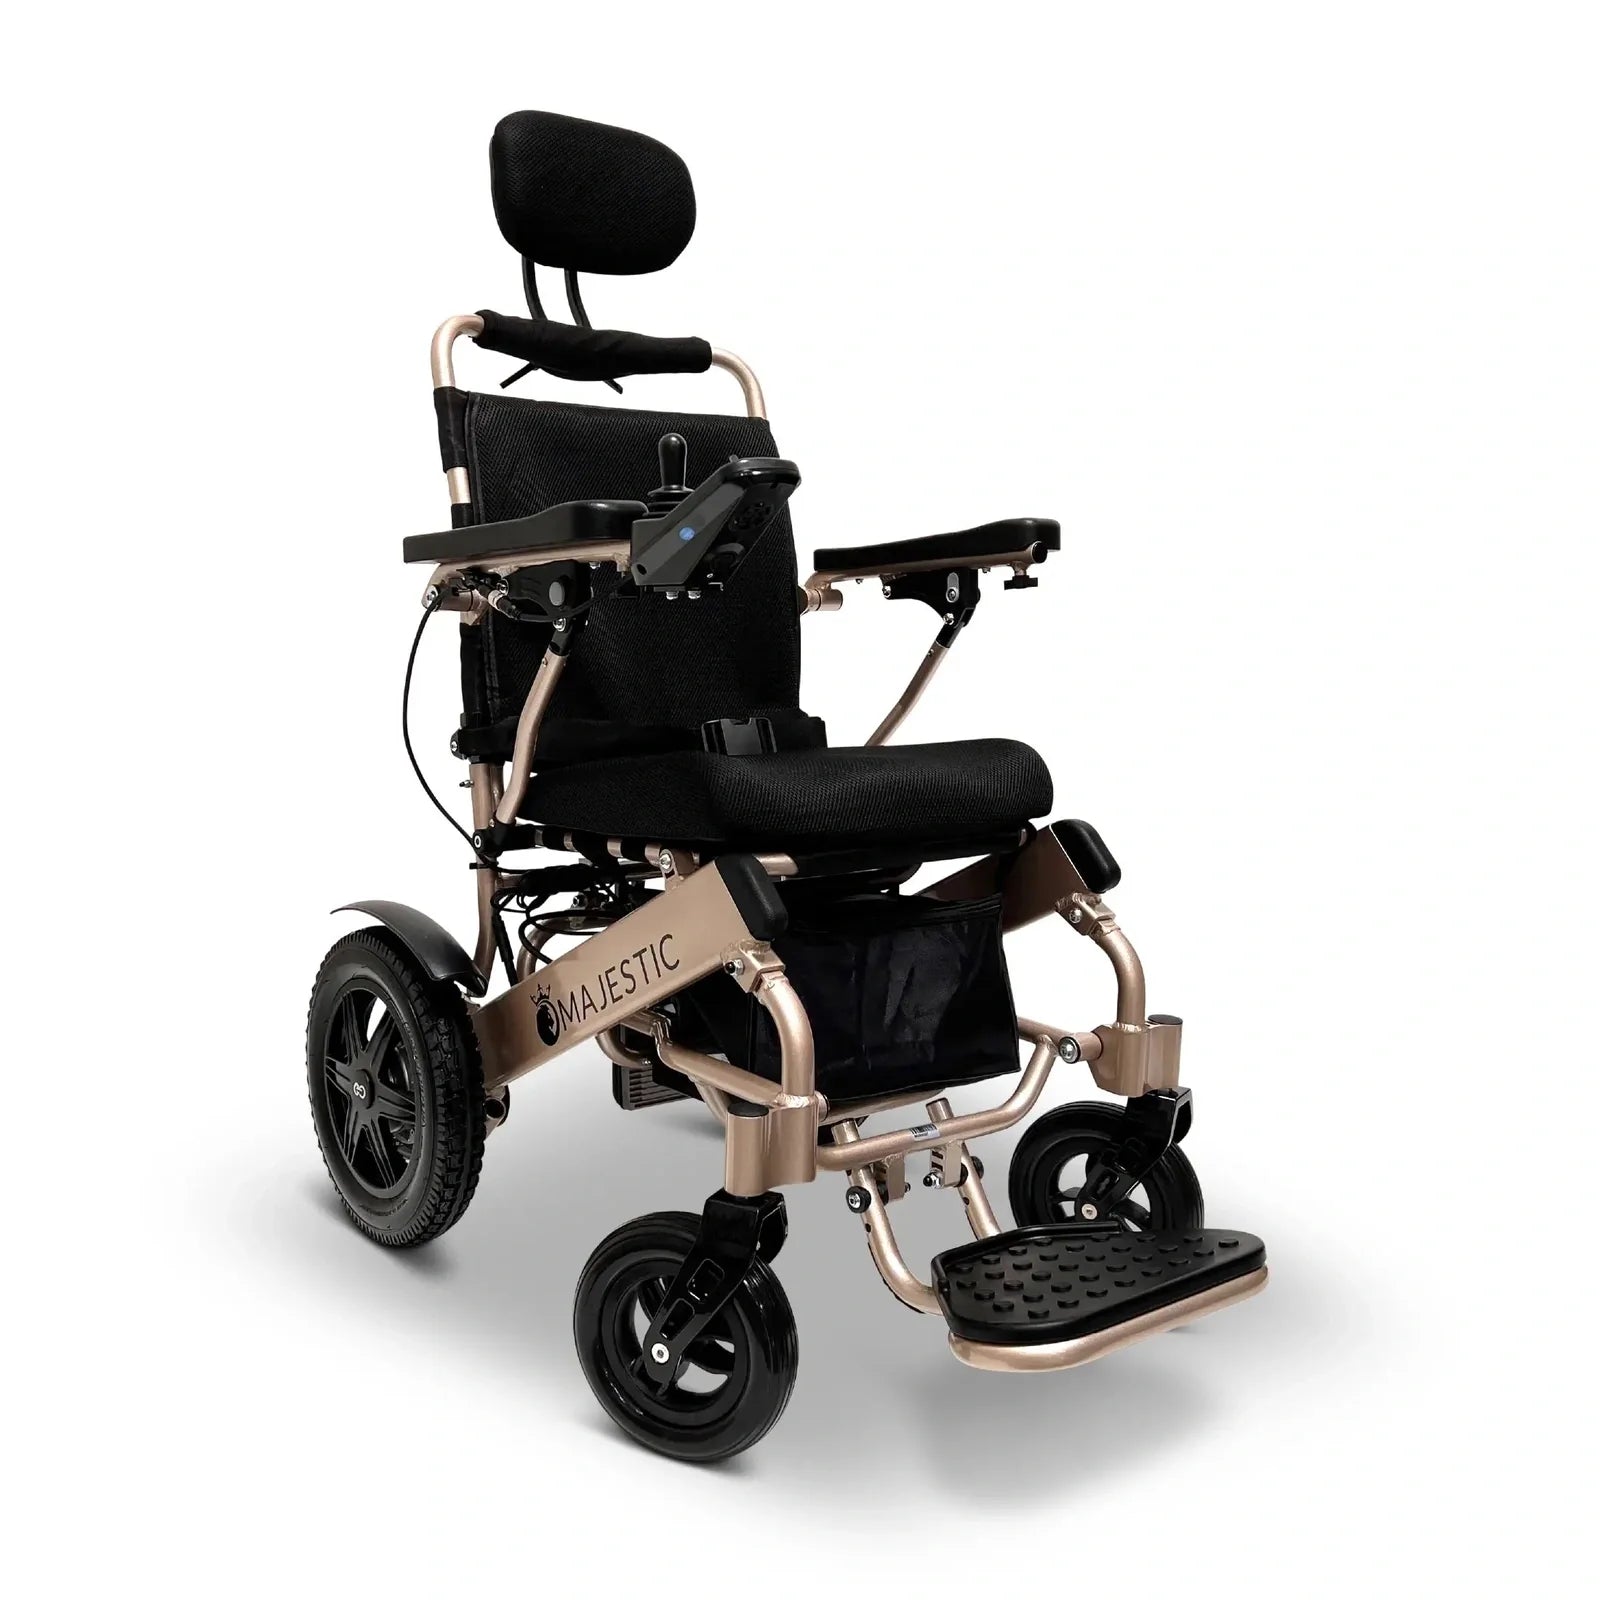 ComfyGO Majestic IQ-9000 Long Range Remote Controlled Folding Reclining Electric Wheelchair Power Wheelchairs ComfyGO Bronze Standard Auto Reclining